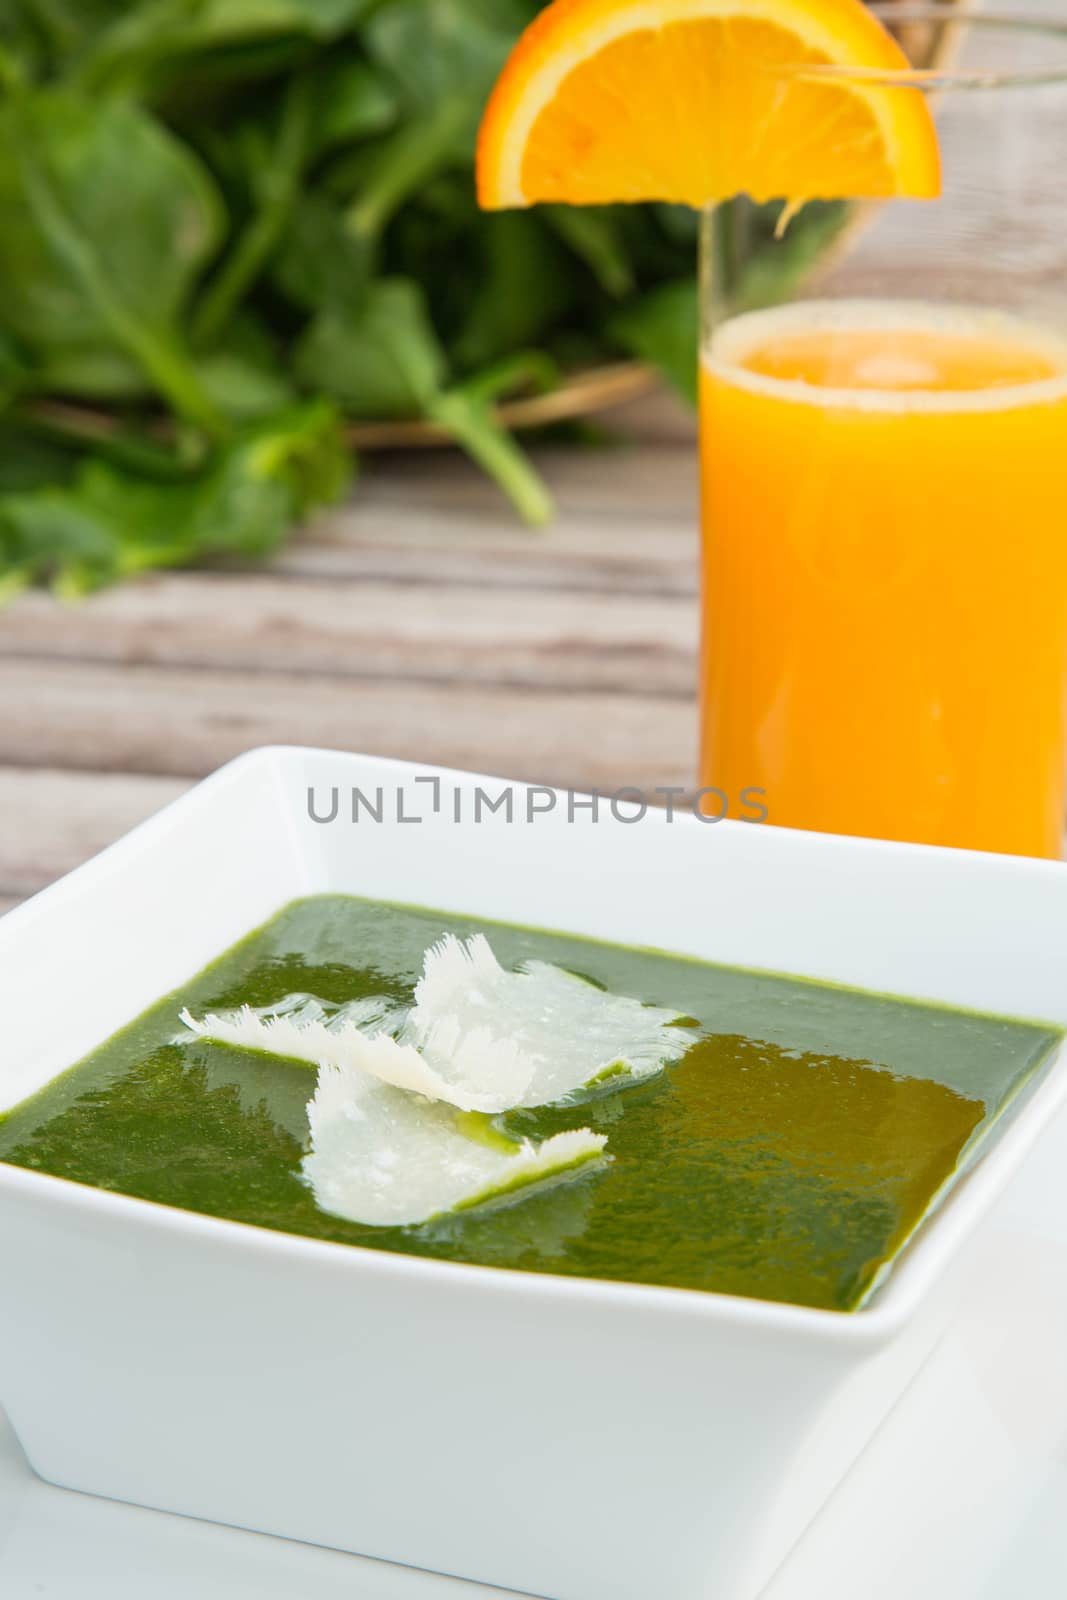 Spinach cream soup in the white square plate and a glass of fresh orange juice. Fresh leaves of spinach in the background